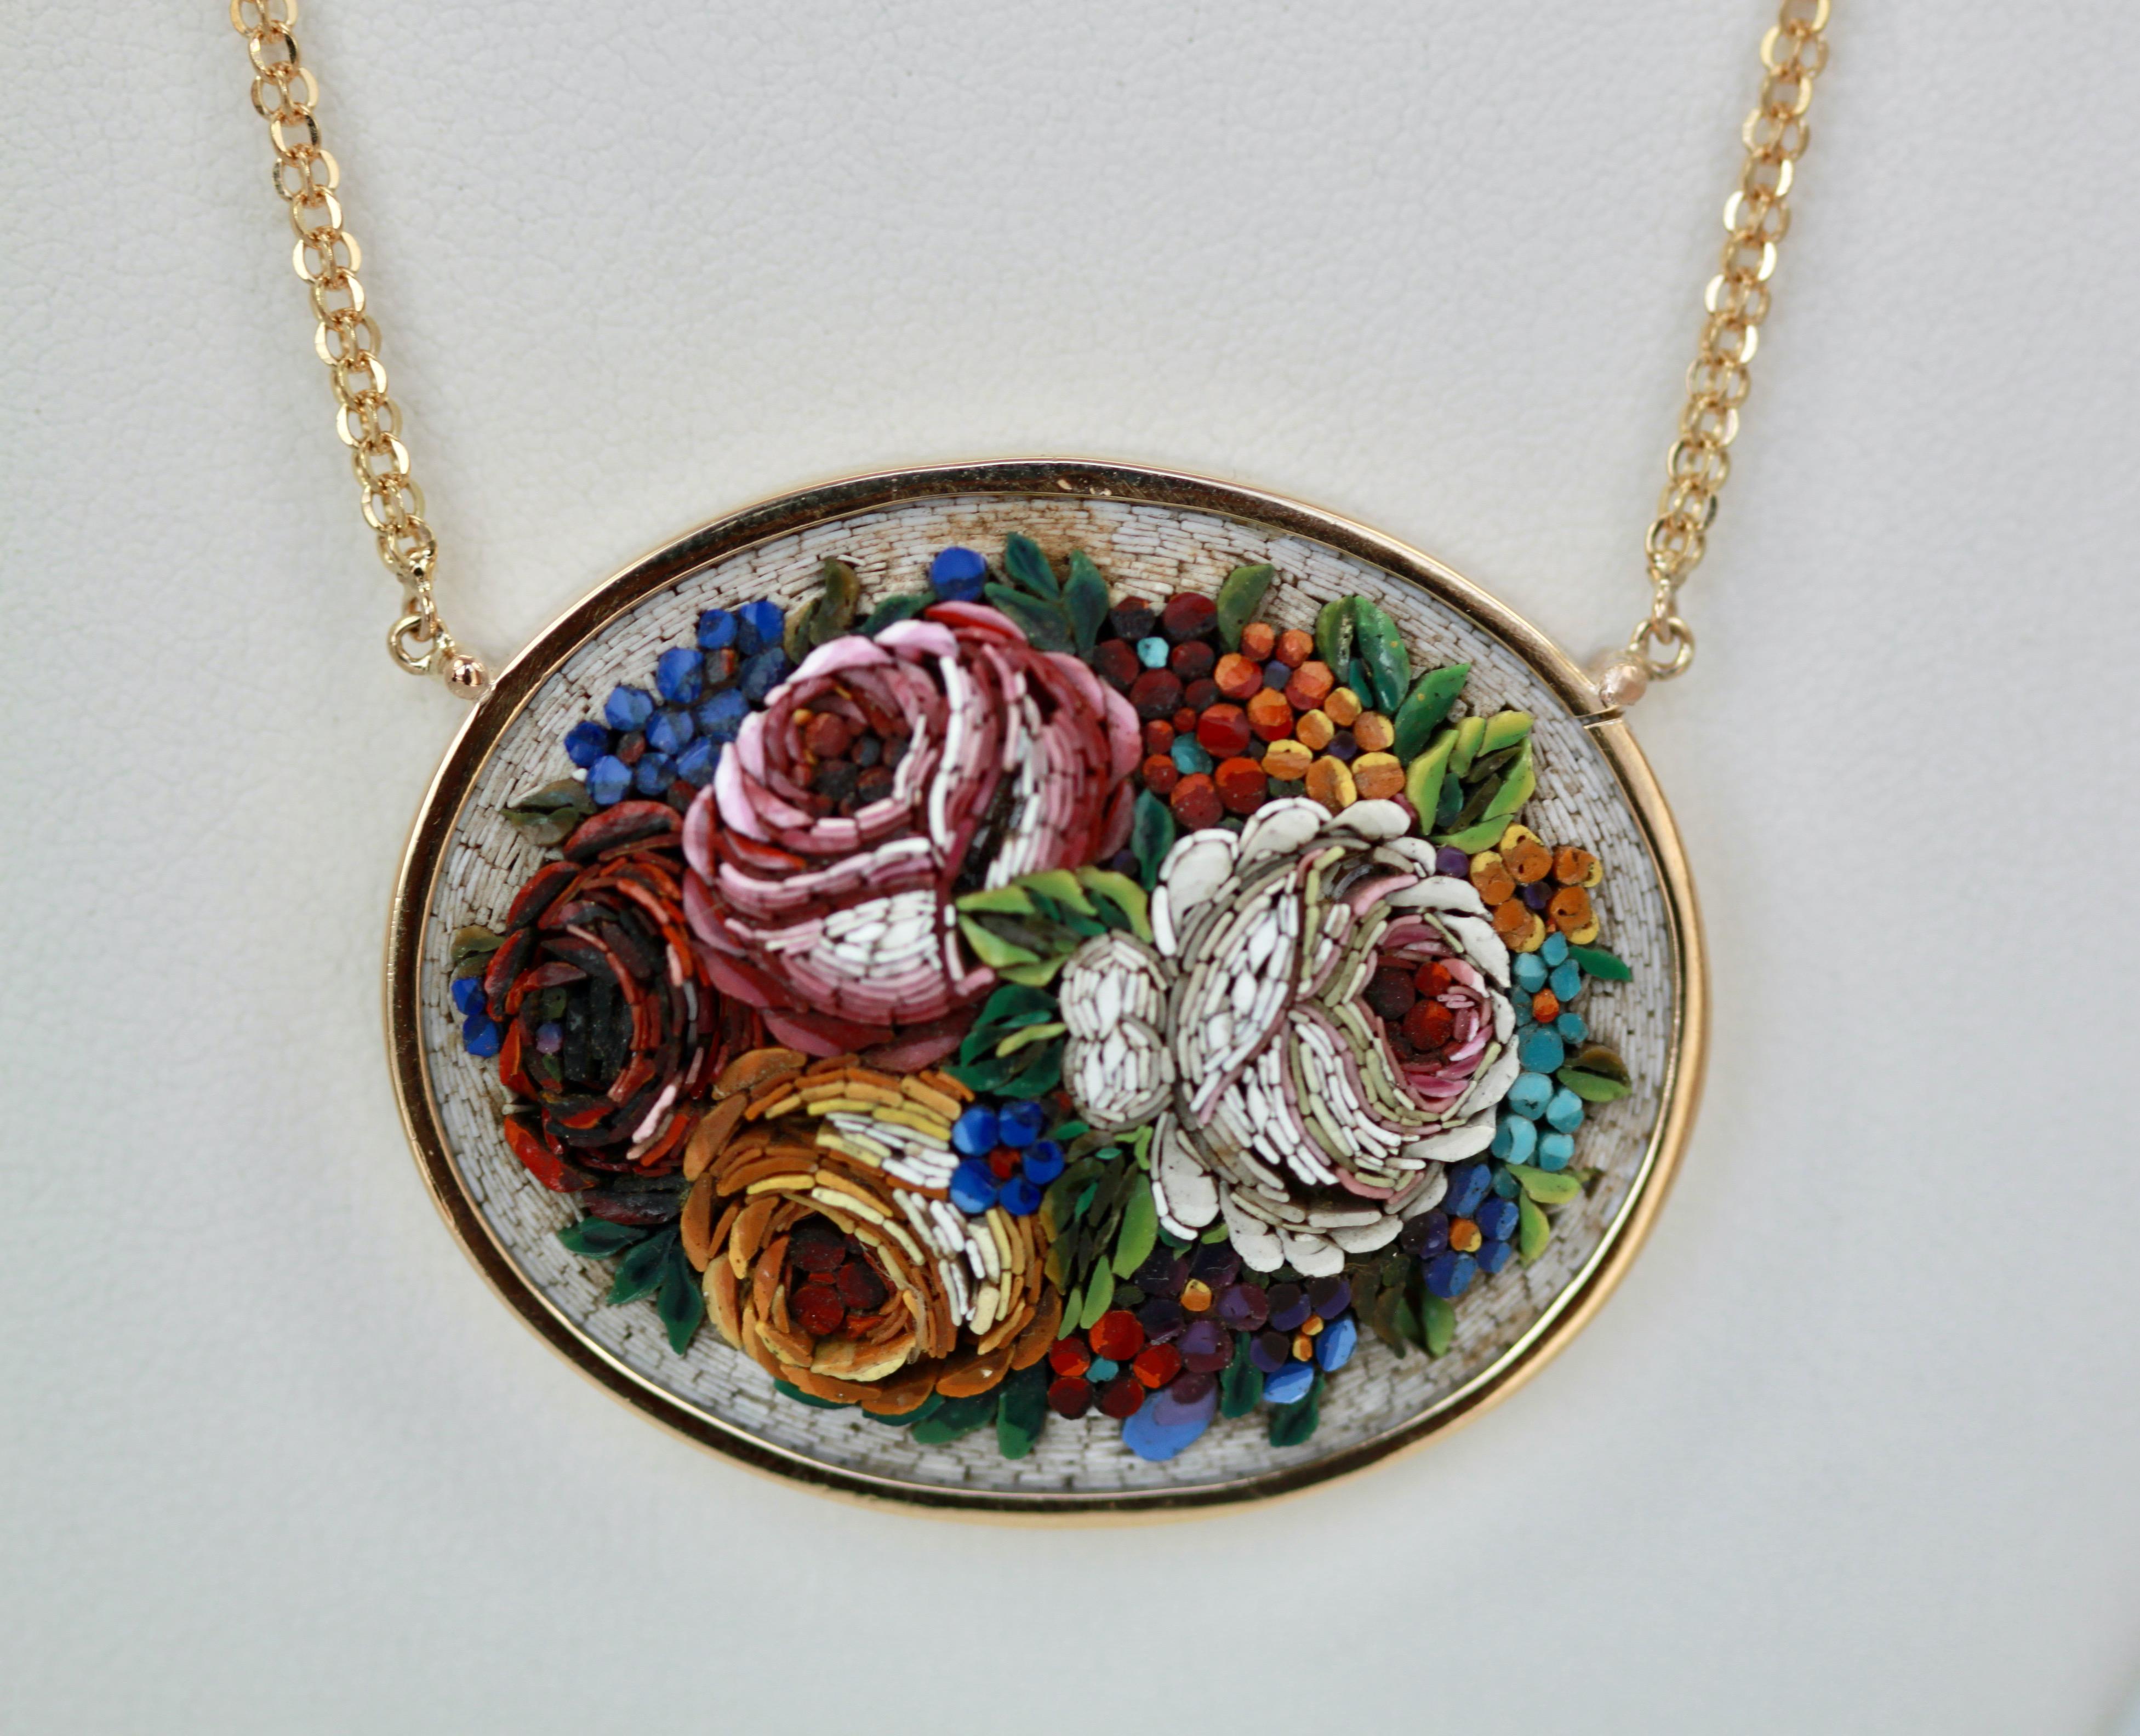 This gorgeous Antique Micro Mosaic Plaque is absolutely gorgeous.  The piece is in perfect condition and it is filled with roses and floral details. There are no pieces lost and it is quite large in size for a Mosaic piece. I had this mounted on a